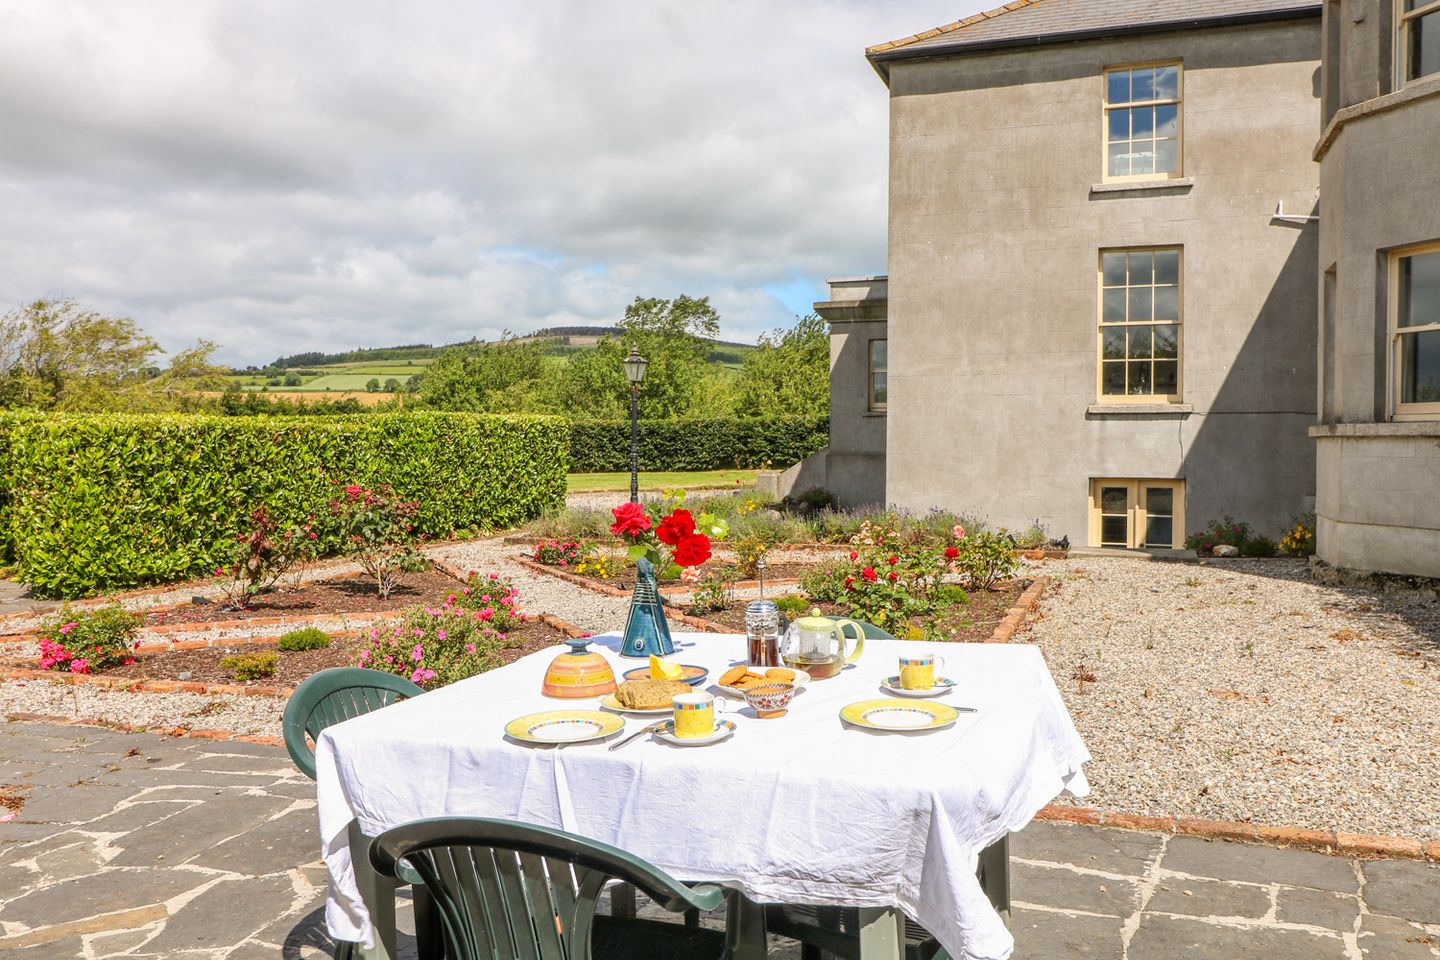 Ref. 1002096 The Lodge at Raheengraney House, Rahe, Wicklow Town, Co. Wicklow